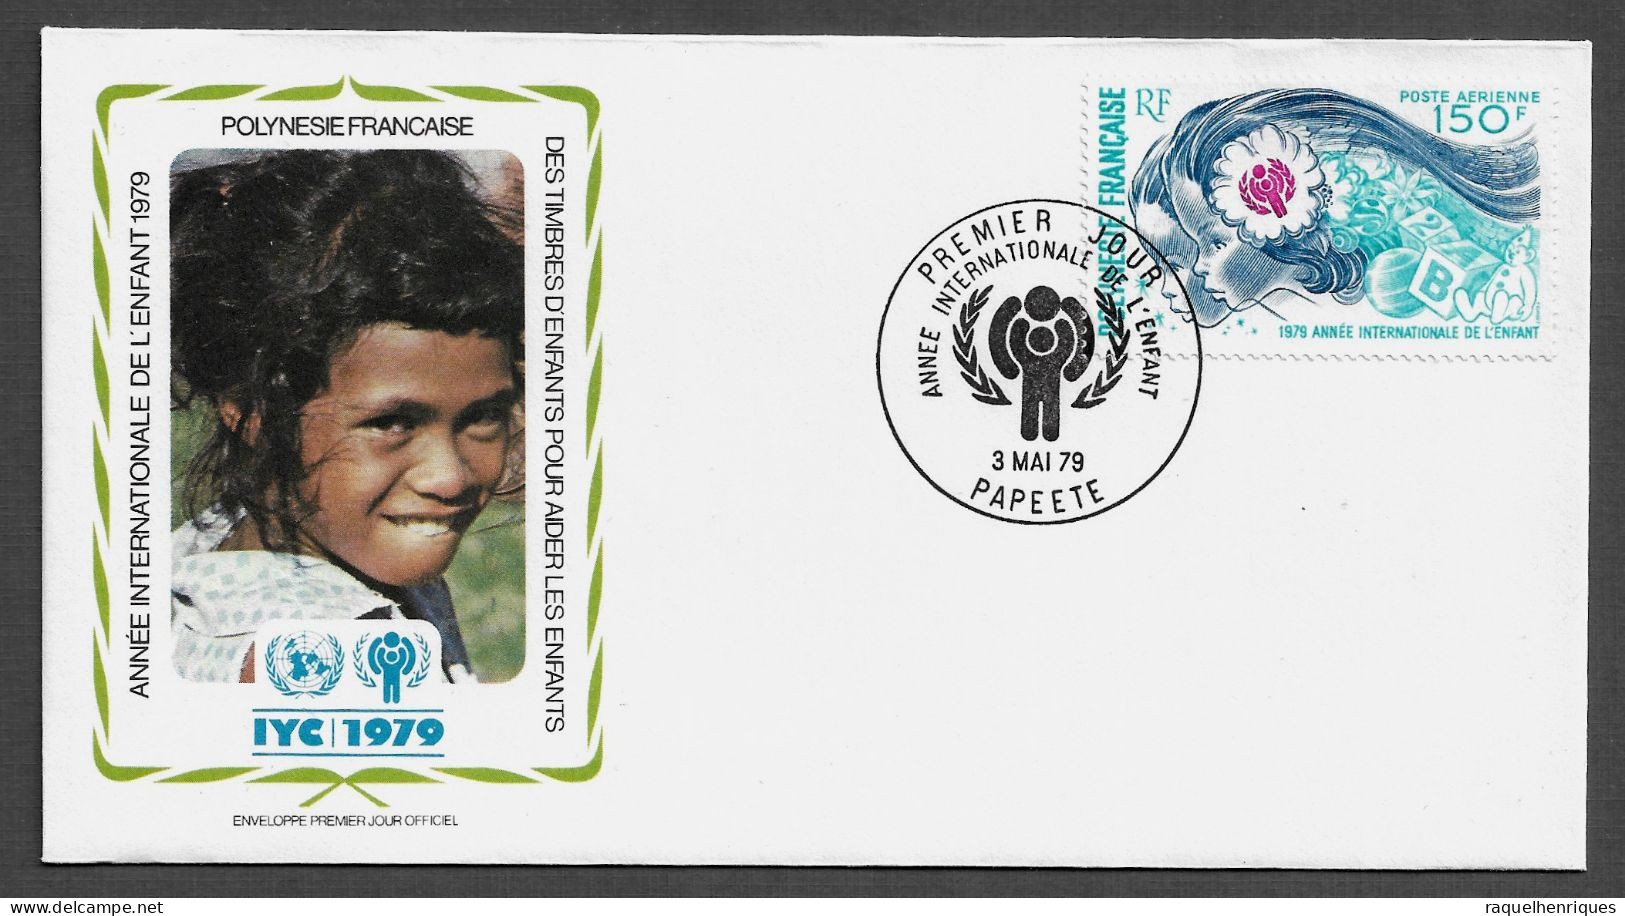 FRENCH POLYNESIA FDC COVER - 1979 International Year Of The Child SET FDC (FDC79#07) - Lettres & Documents